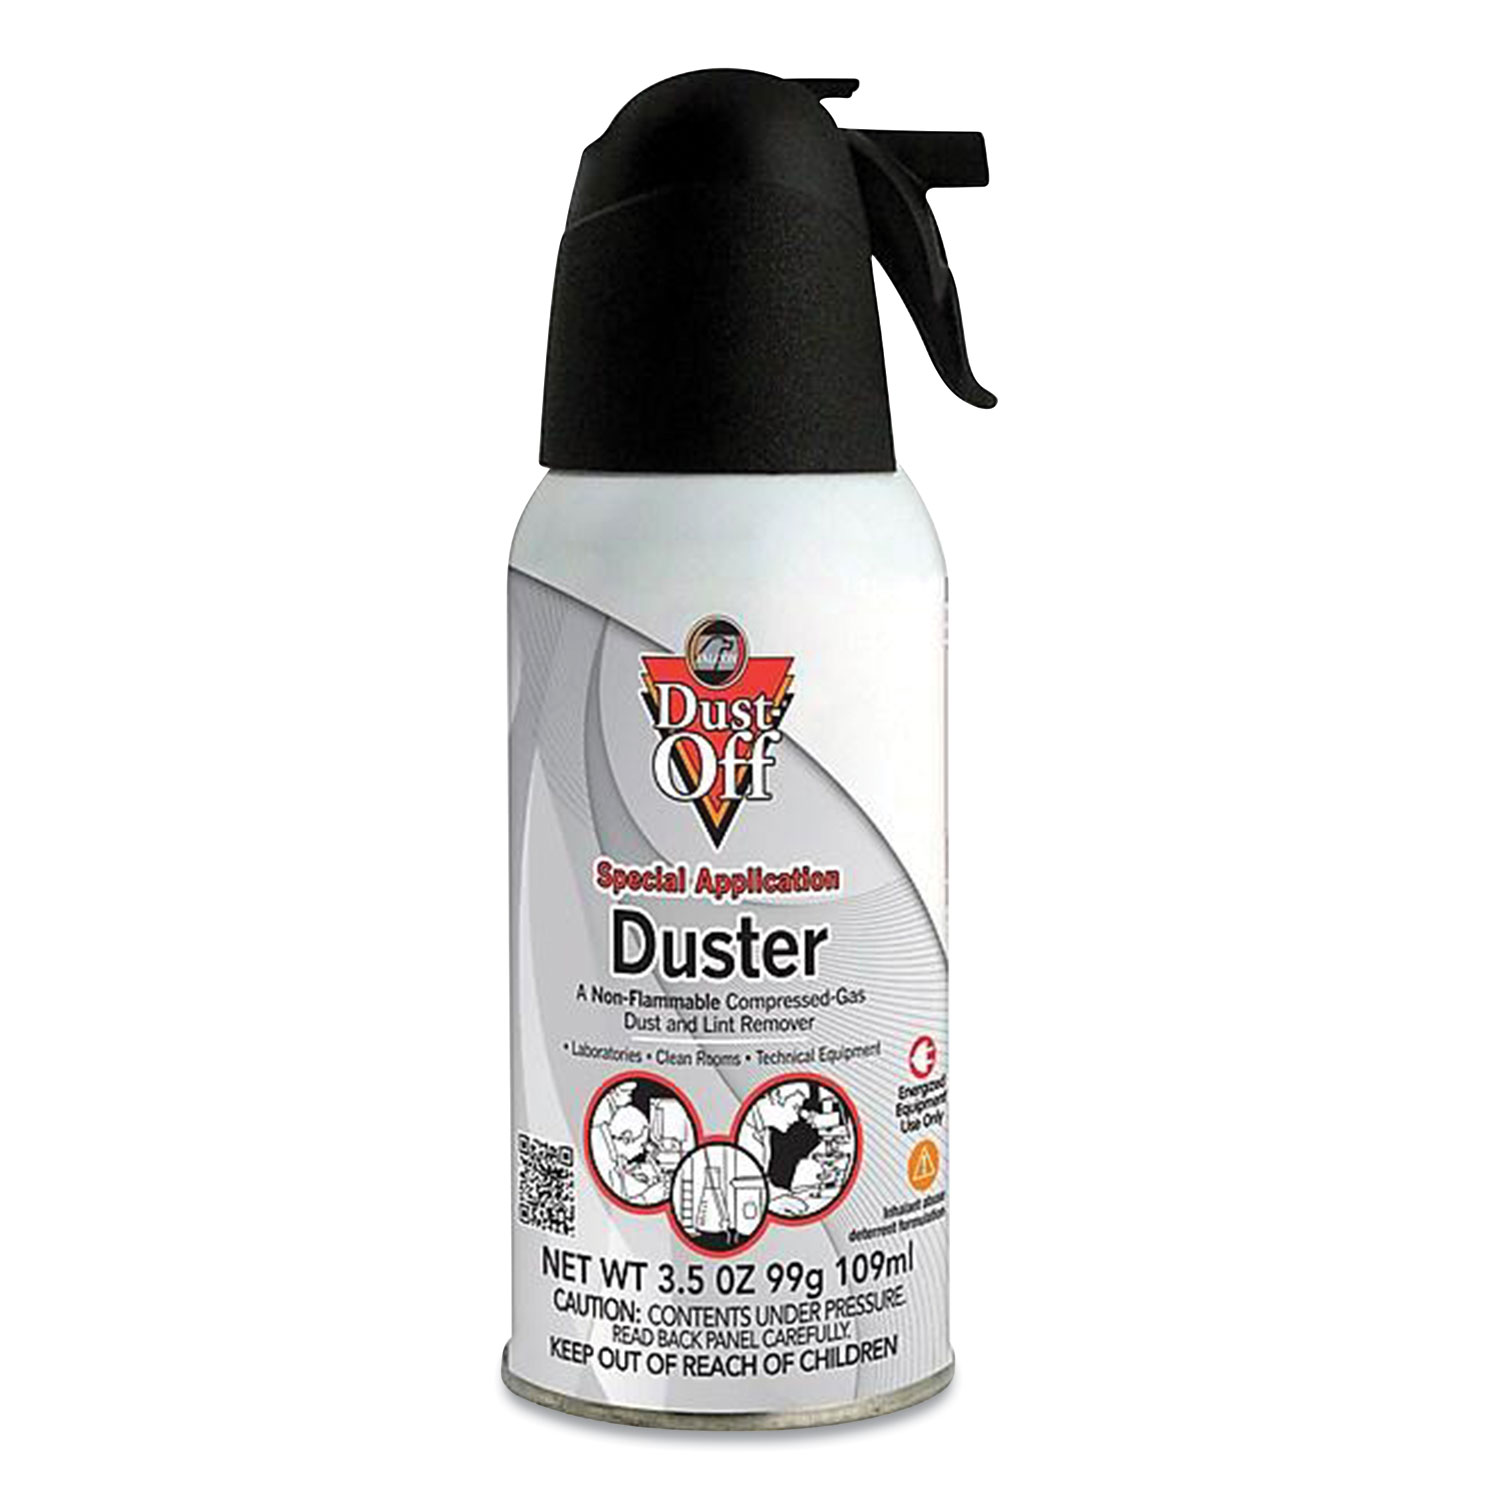  Dust-Off DPNJB Nonflammable Duster, 3.5 oz Can (DOF633700) 